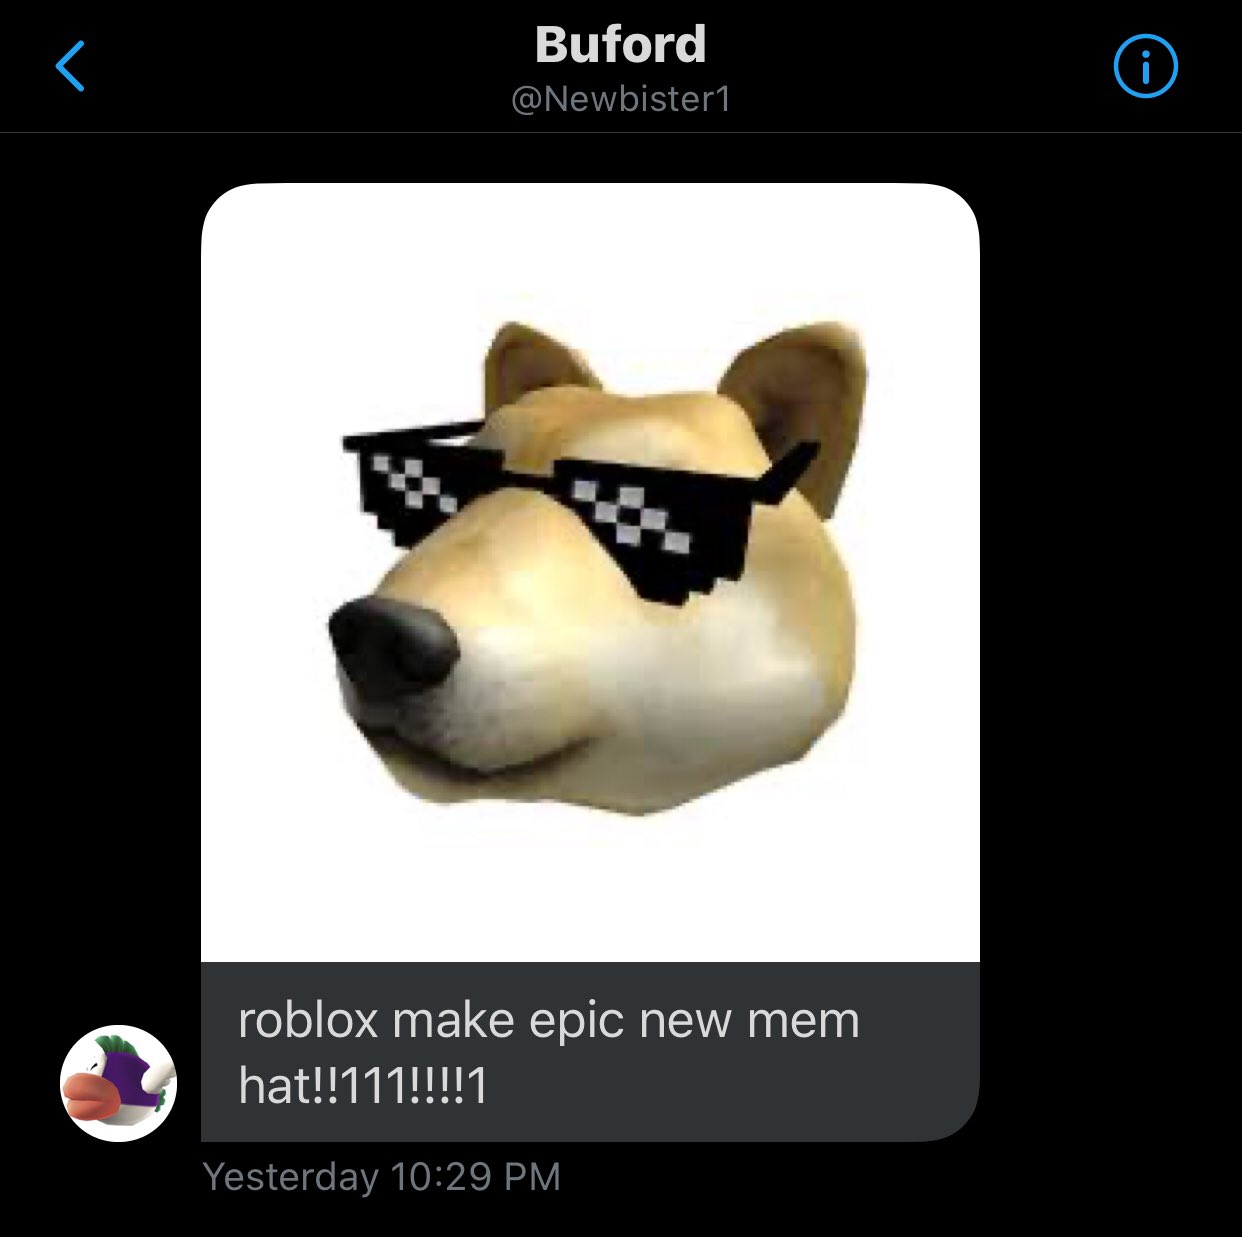 News Roblox On Twitter Roblox Is Making A Dank Meme Hat - reaps isnt cool on twitter yknow how roblox youtubers